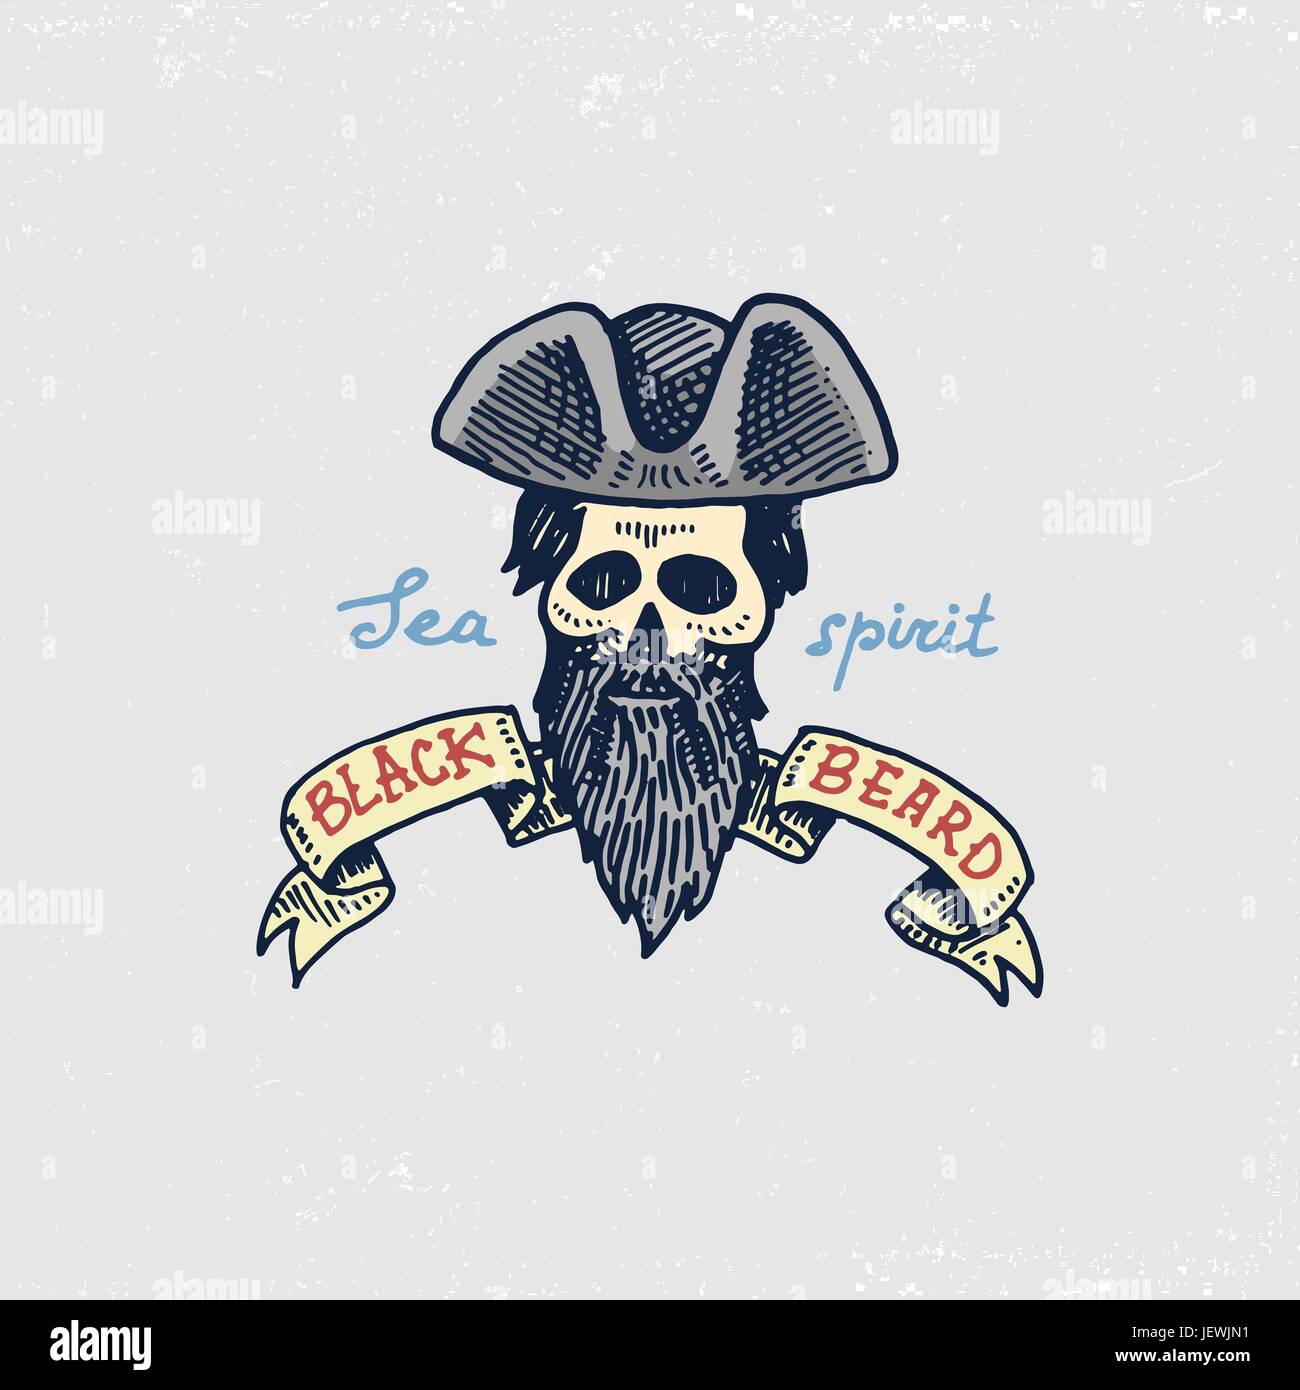 set of engraved, hand drawn, old, labels or badges for corsairs, skull, black beard. Pirates marine and nautical or sea, ocean emblem. Stock Vector